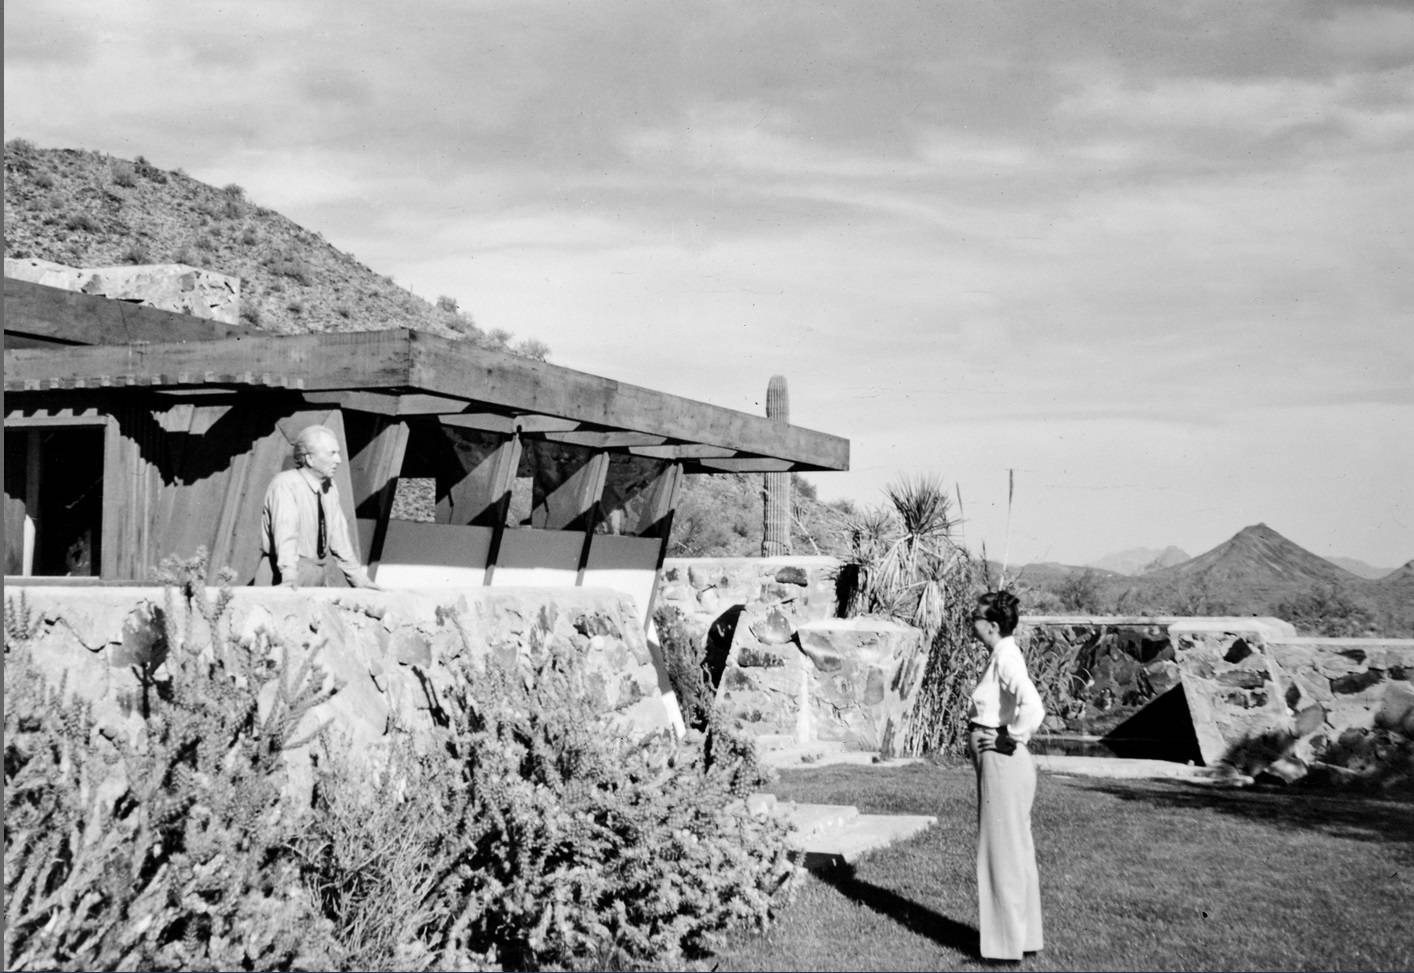 Frank Lloyd Wright and the Women Who Made Him